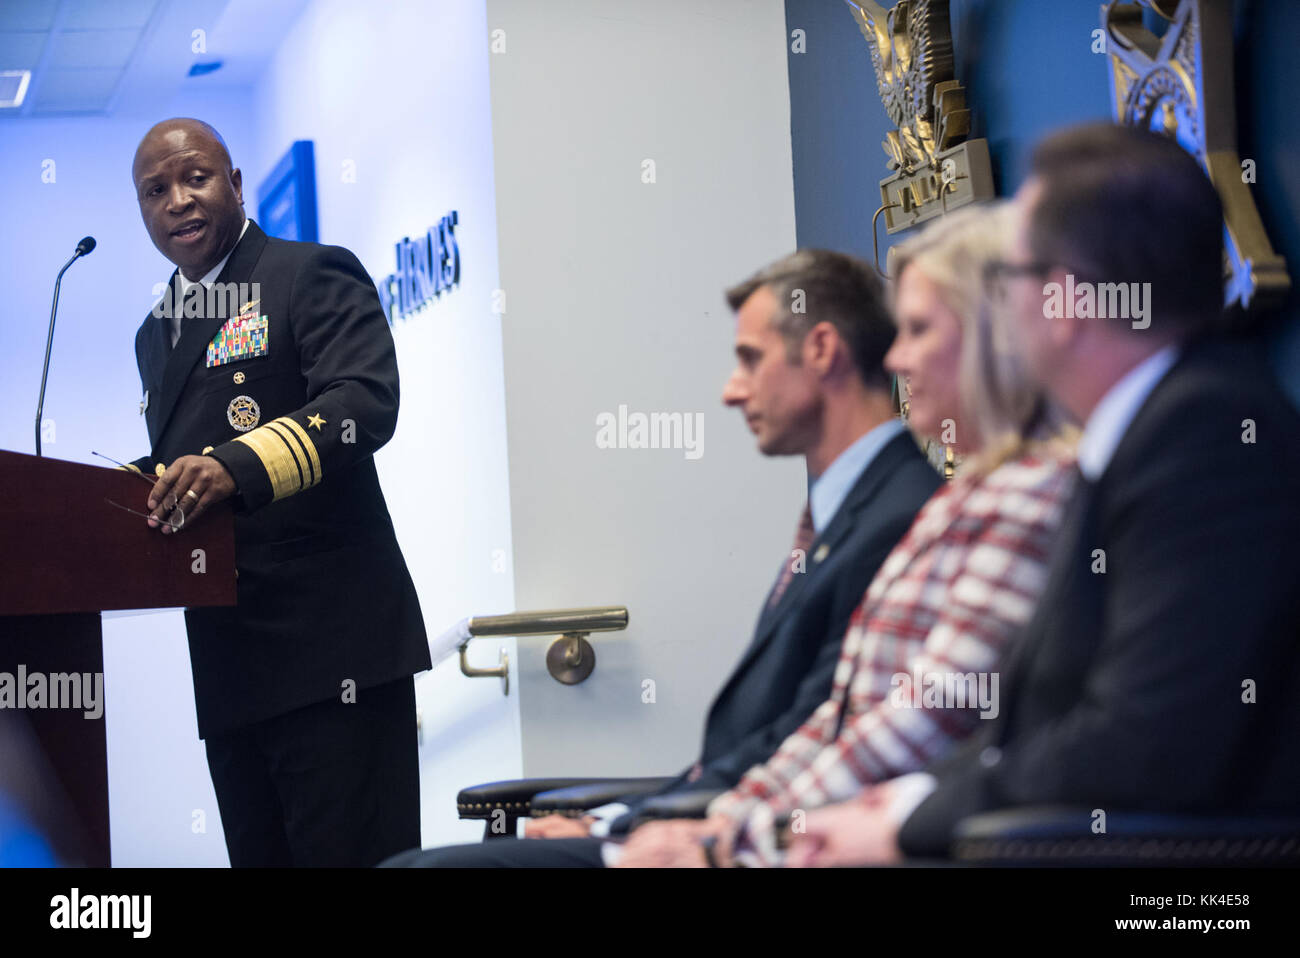 U.S. Navy Vice Adm. Kevin D. Scott, Director Joint Force Development (J7) on the Joint Staff, speaks during the 2017 NewmanÕs Own Awards at the Hall of Heroes in the Pentagon, Oct. 11, 2017. The annual competition seeks to reward ingenuity for programs that benefit service men, women, and their families. To date, the competition has recognized 174 programs with awards totally $1, 725,000. (DoD Photo by U.S. Army Sgt. James K. McCann) Stock Photo